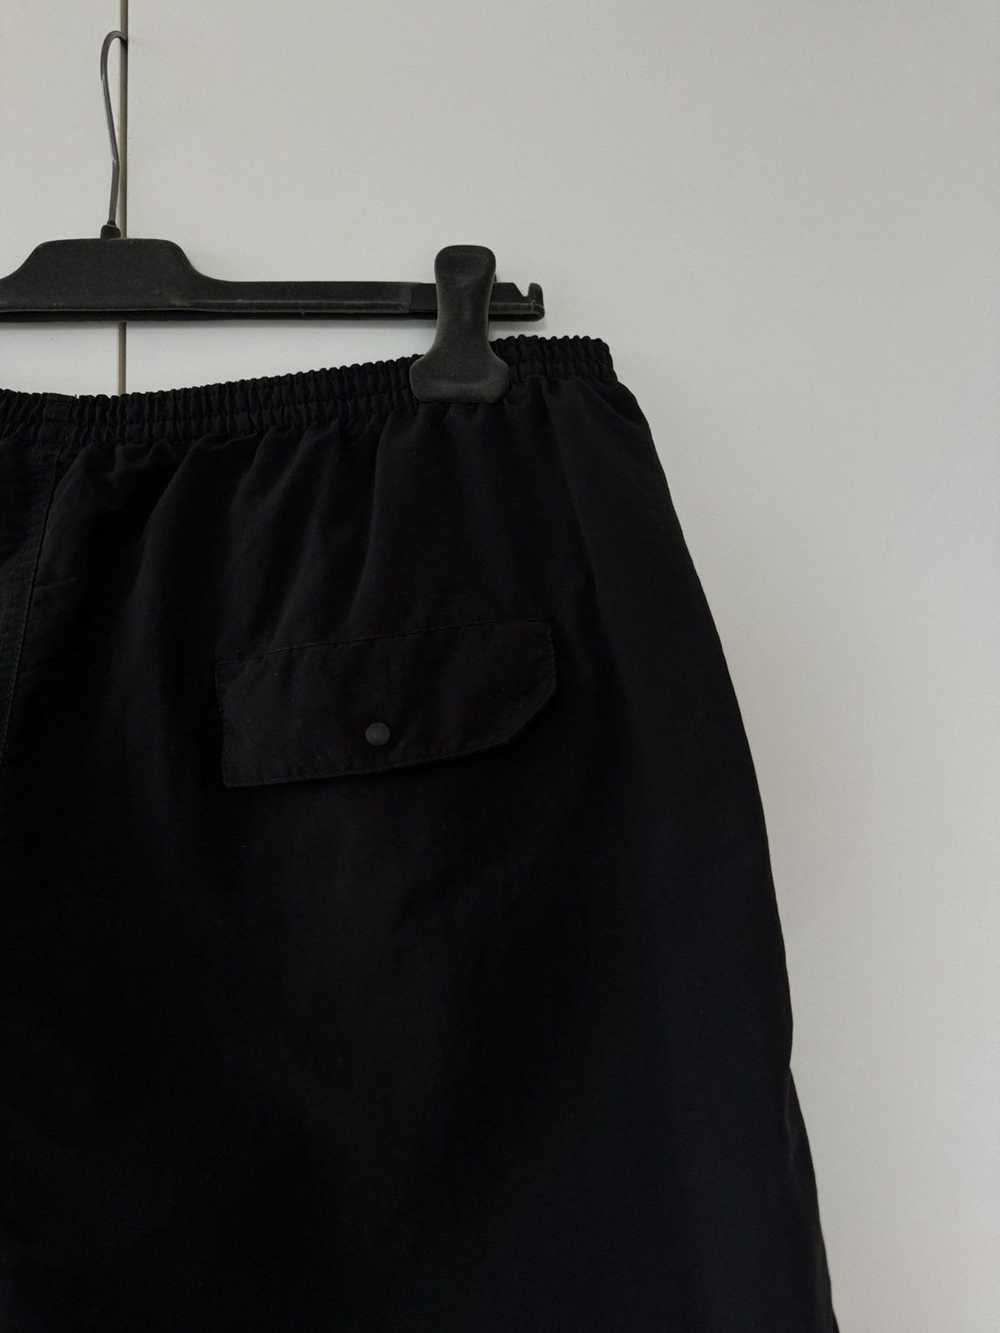 Patagonia 5” Baggie Shorts with Nets Black XL - image 4